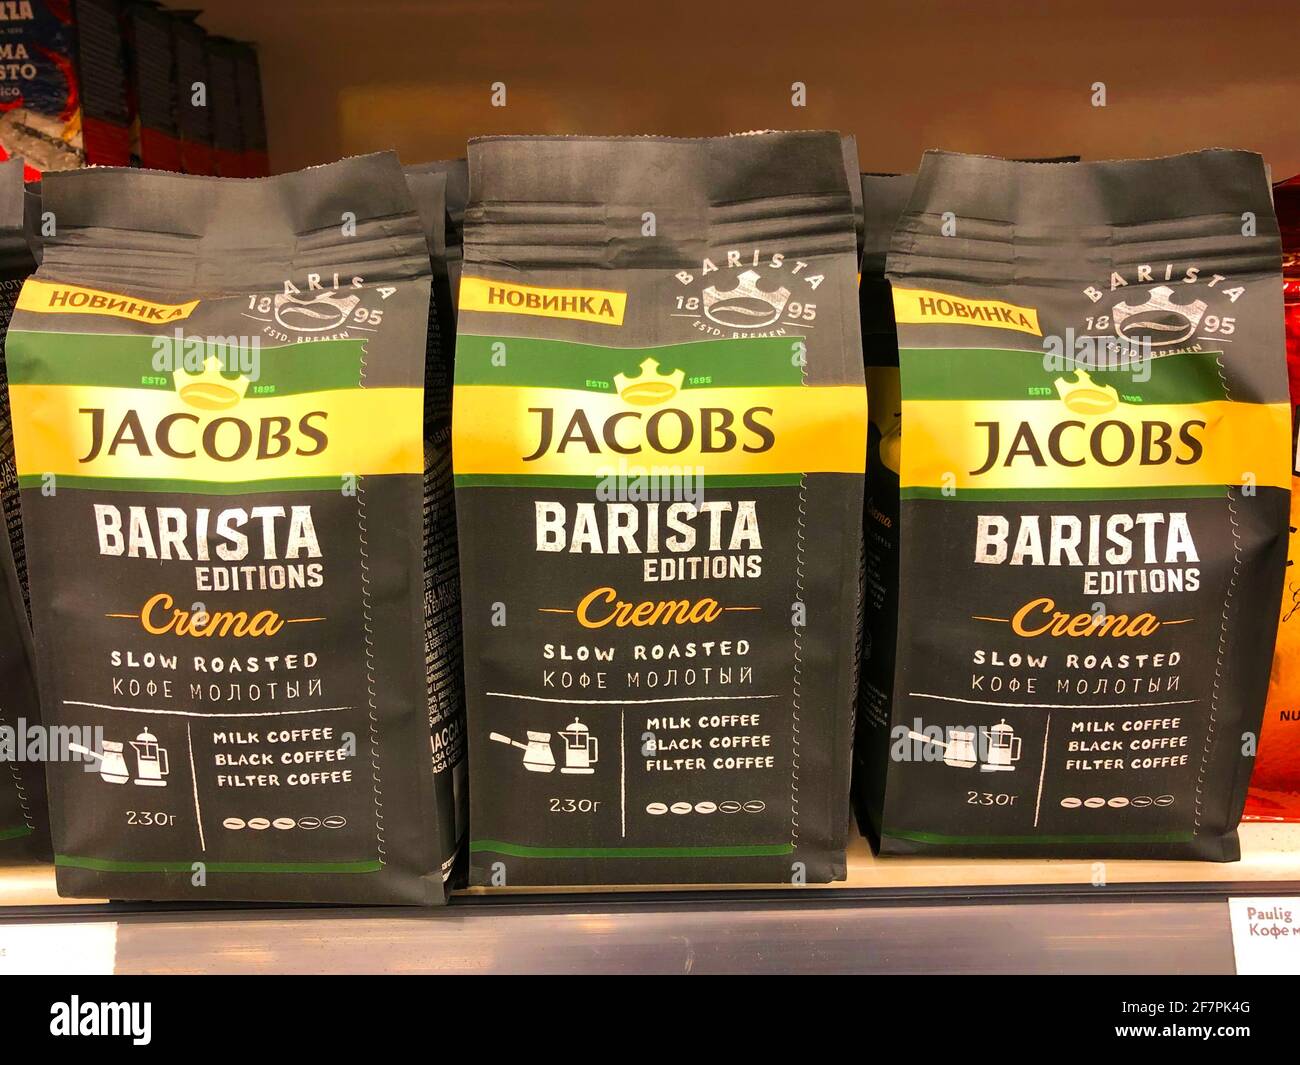 of shelf packing Photo Barista row Russia, Stock crema april Saint-Petersburg. ground Jacobs a bags Alamy up, in - 08 coffee in coffee, editions supermarket close plastic